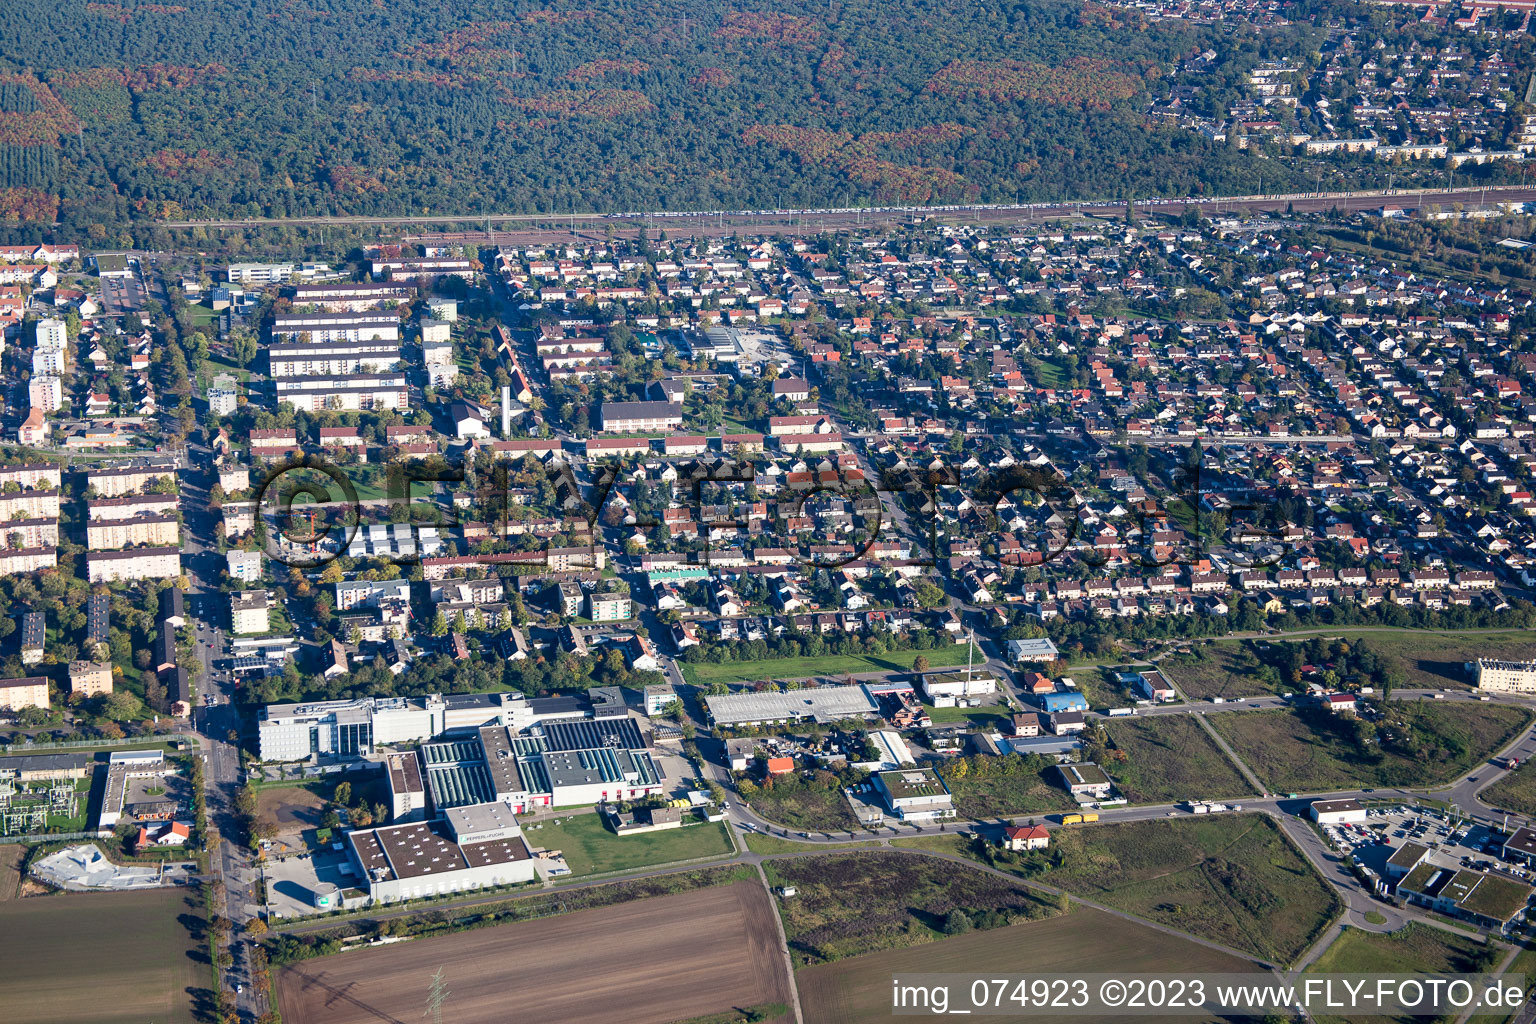 Aerial photograpy of District Schönau in Mannheim in the state Baden-Wuerttemberg, Germany